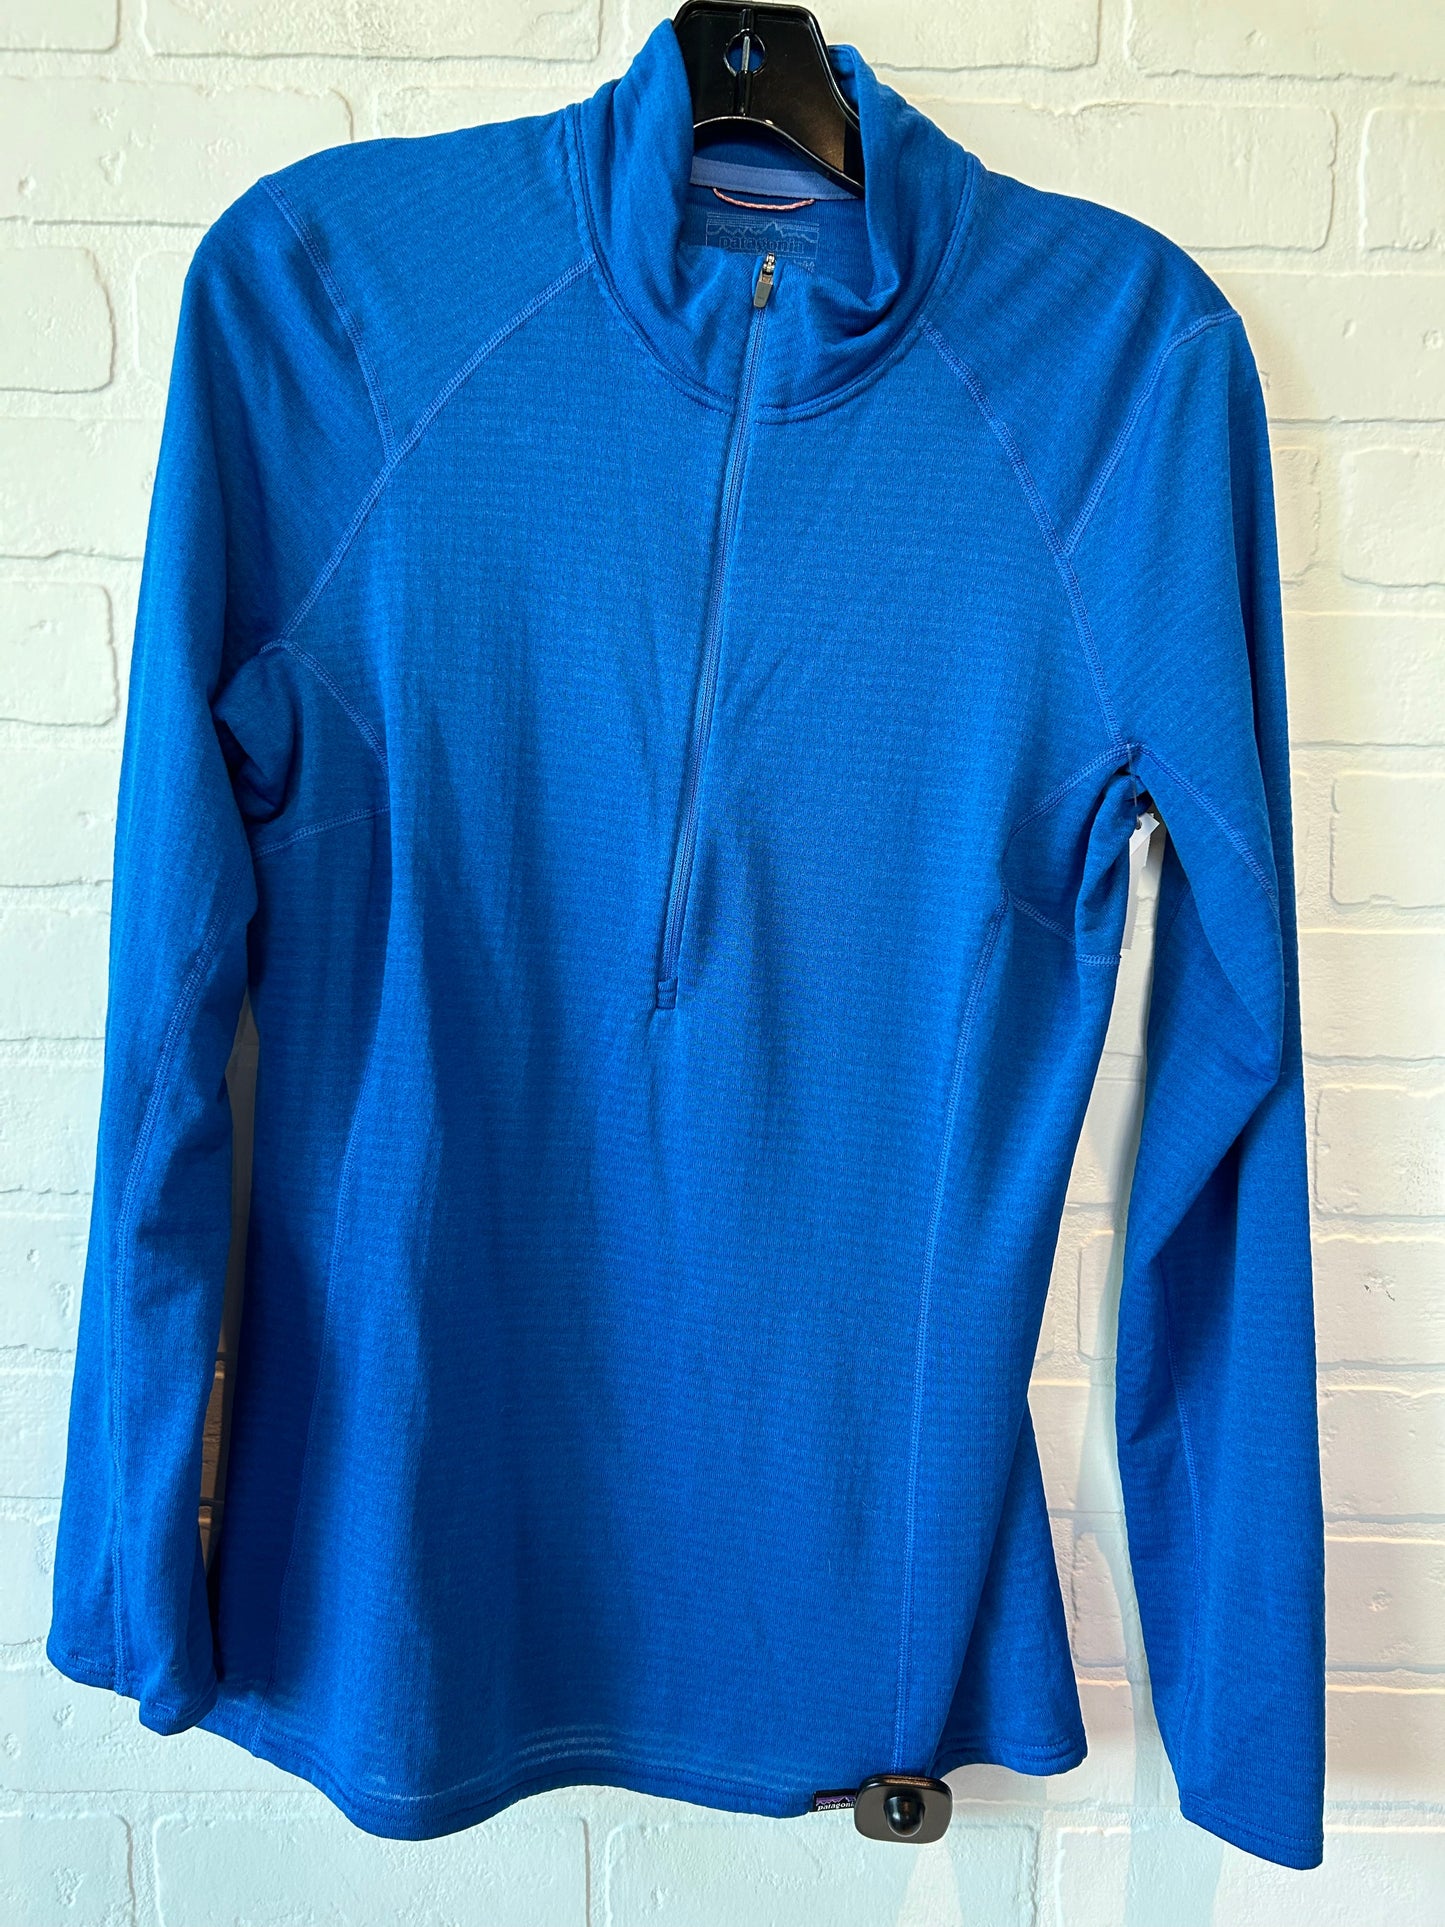 Blue Athletic Top Long Sleeve Collar Patagonia, Size M